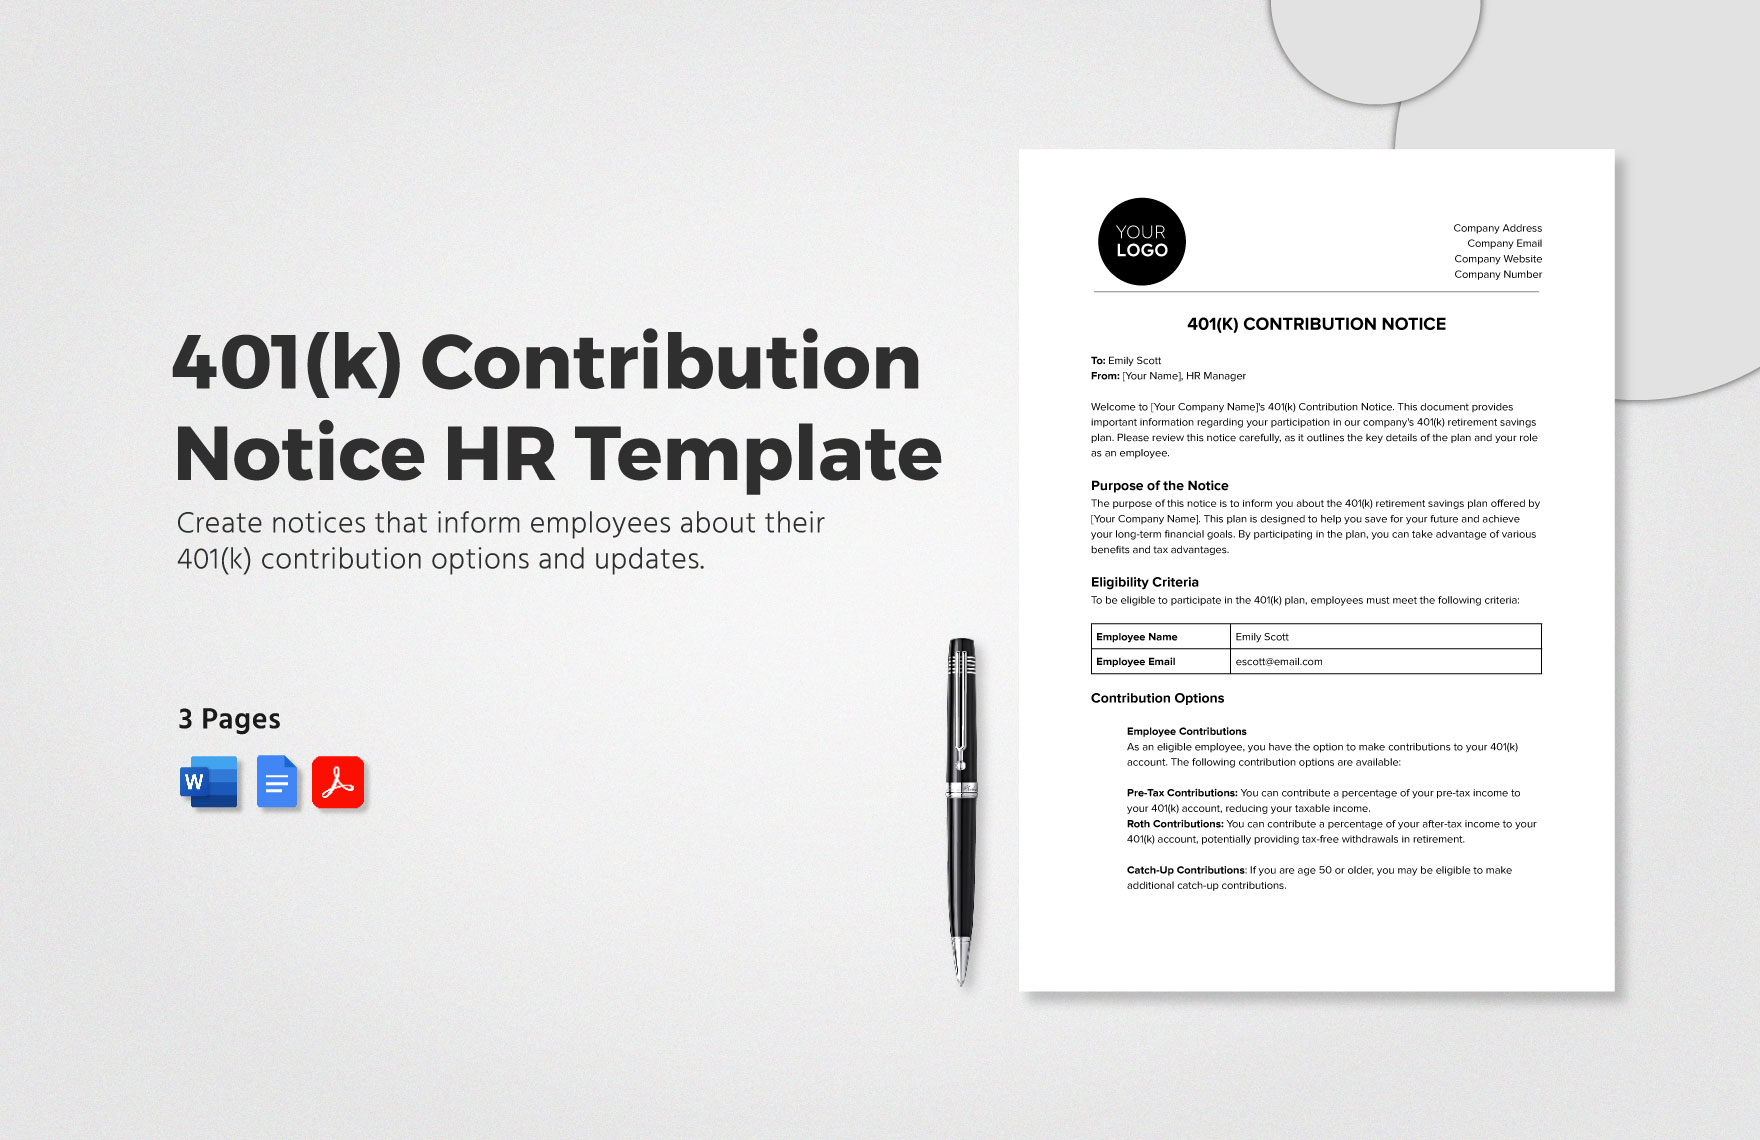 401(k) Contribution Notice HR Template in Word, Google Docs, PDF